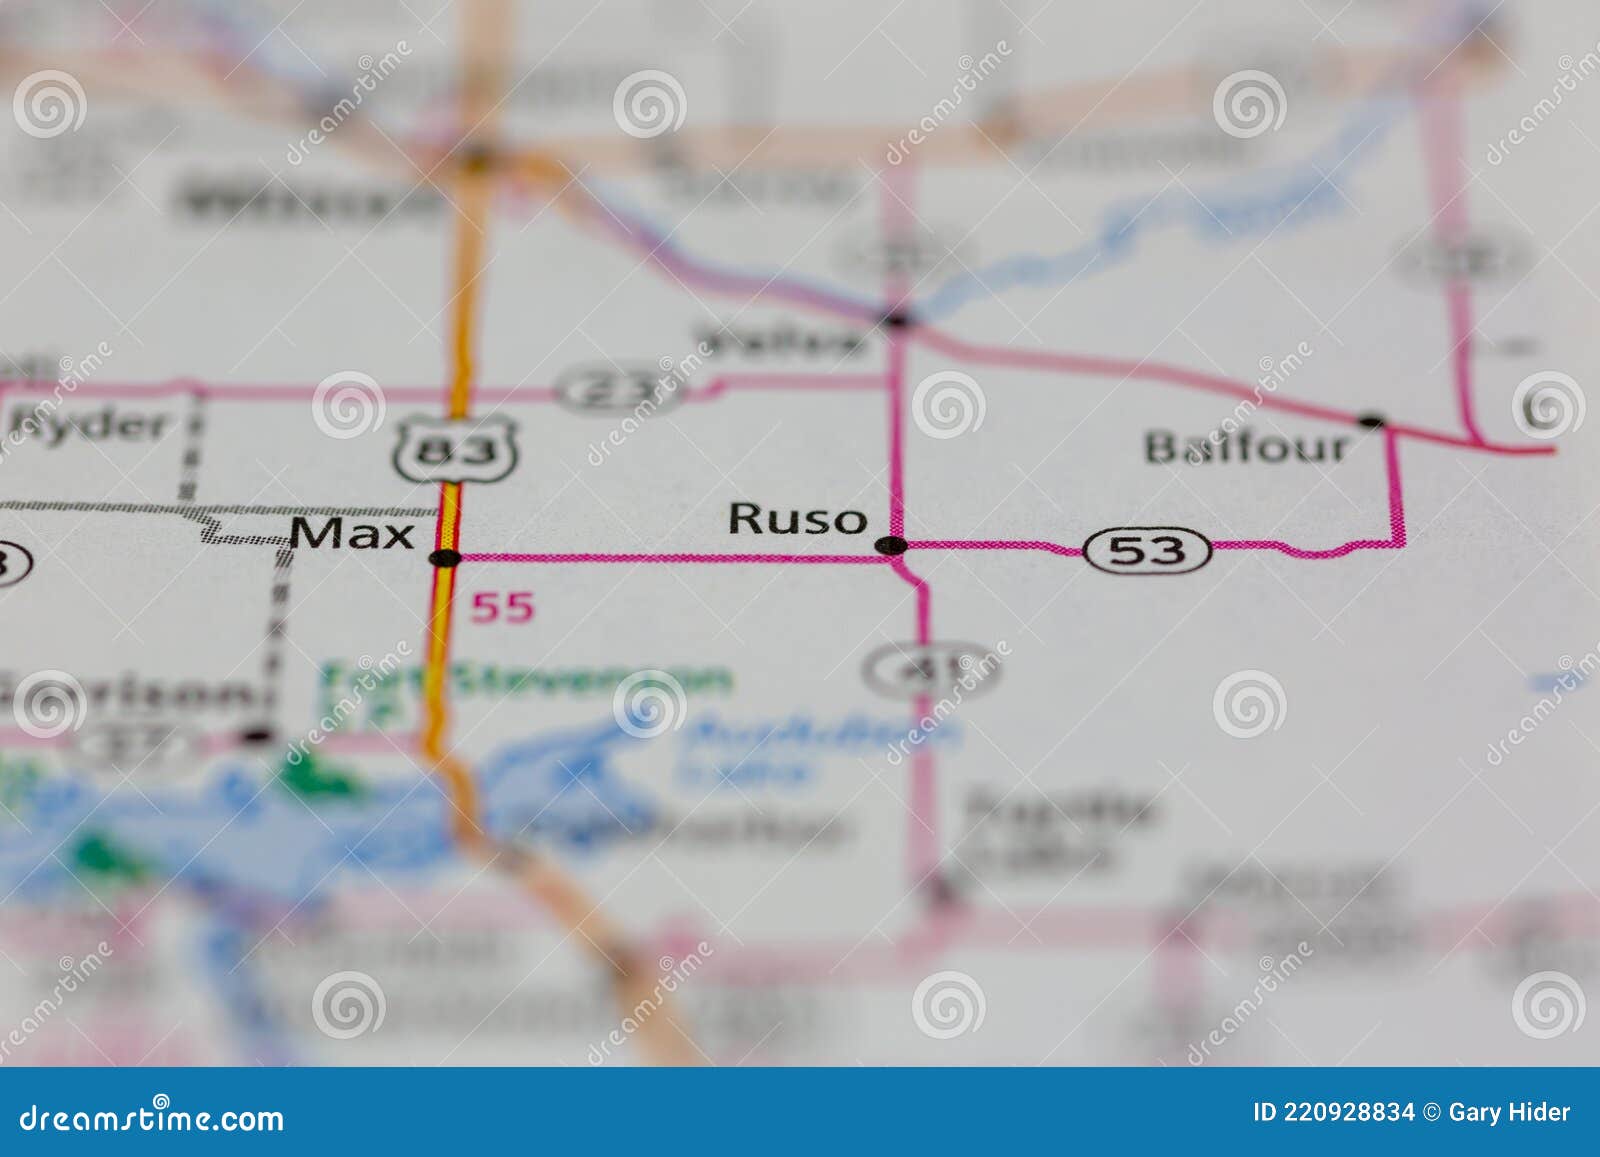 06-10-2021 portsmouth, hampshire, uk, ruso north dakota usa shown of a road map or geography map